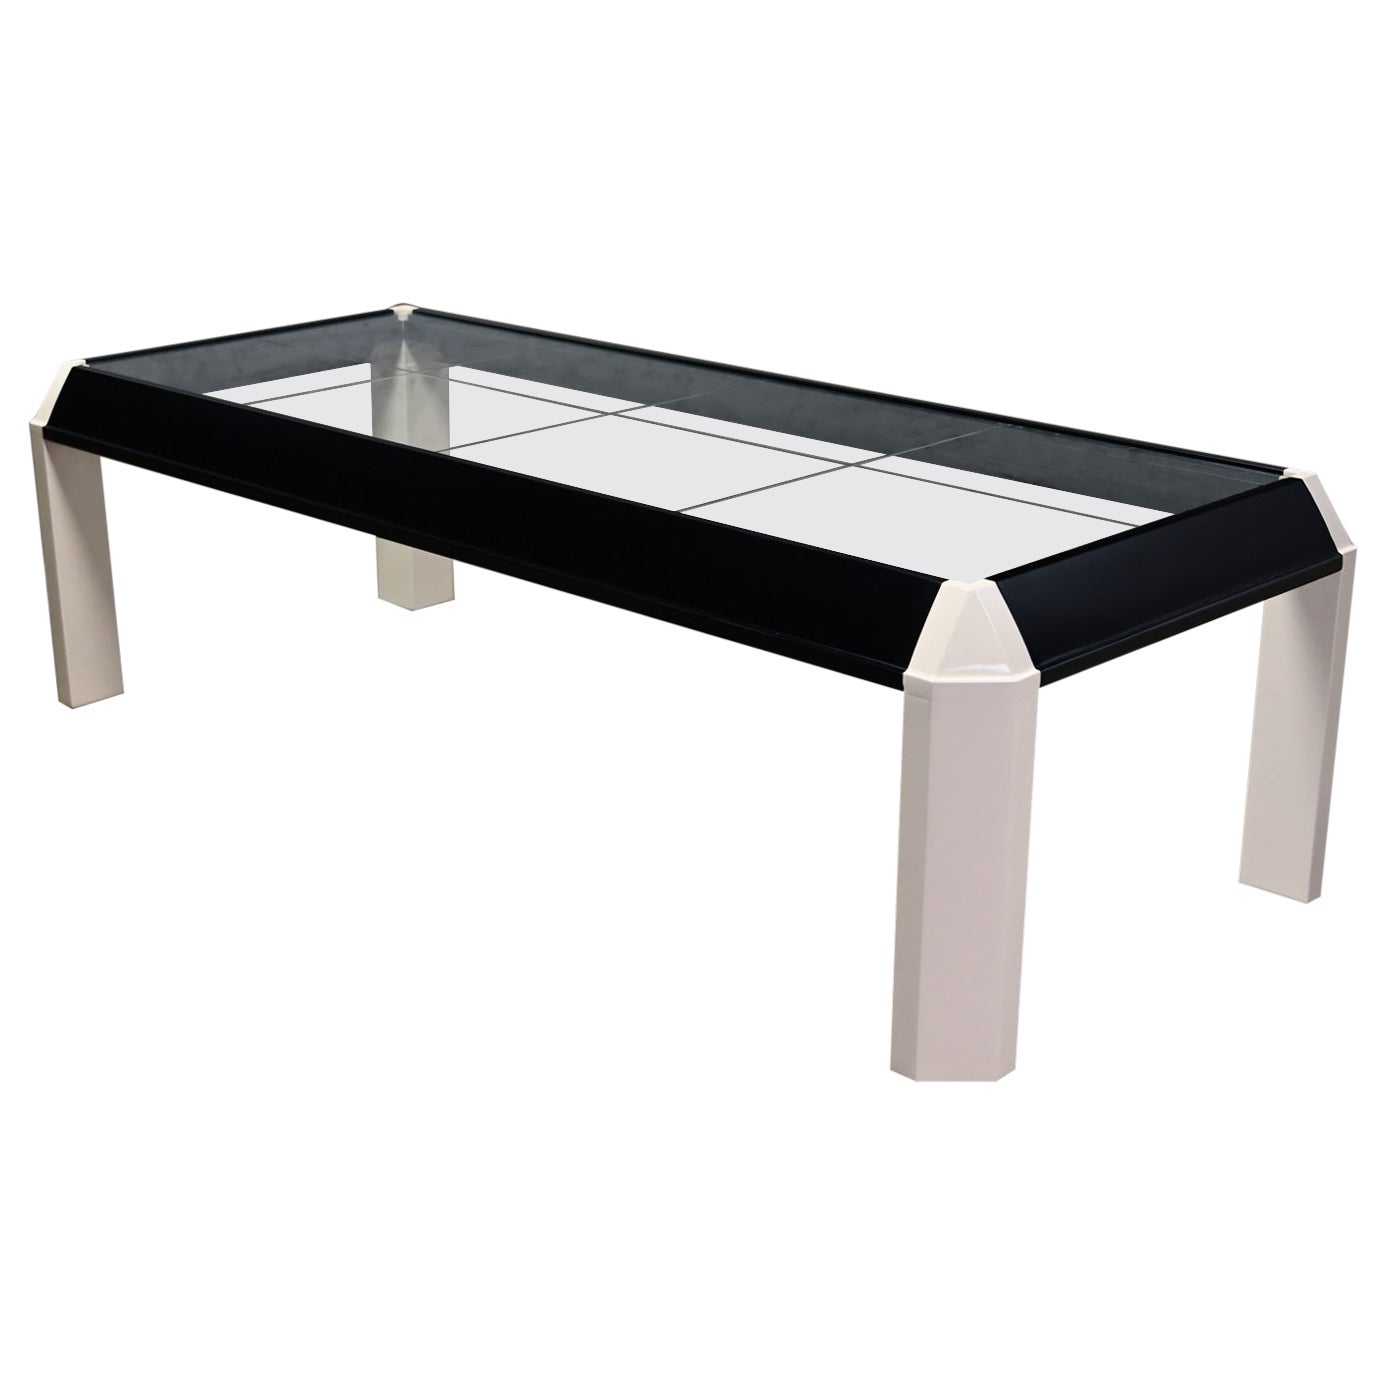 Postmodern Coffee Table Black Painted Frame Off White Trapezoid Legs Glass Top For Sale